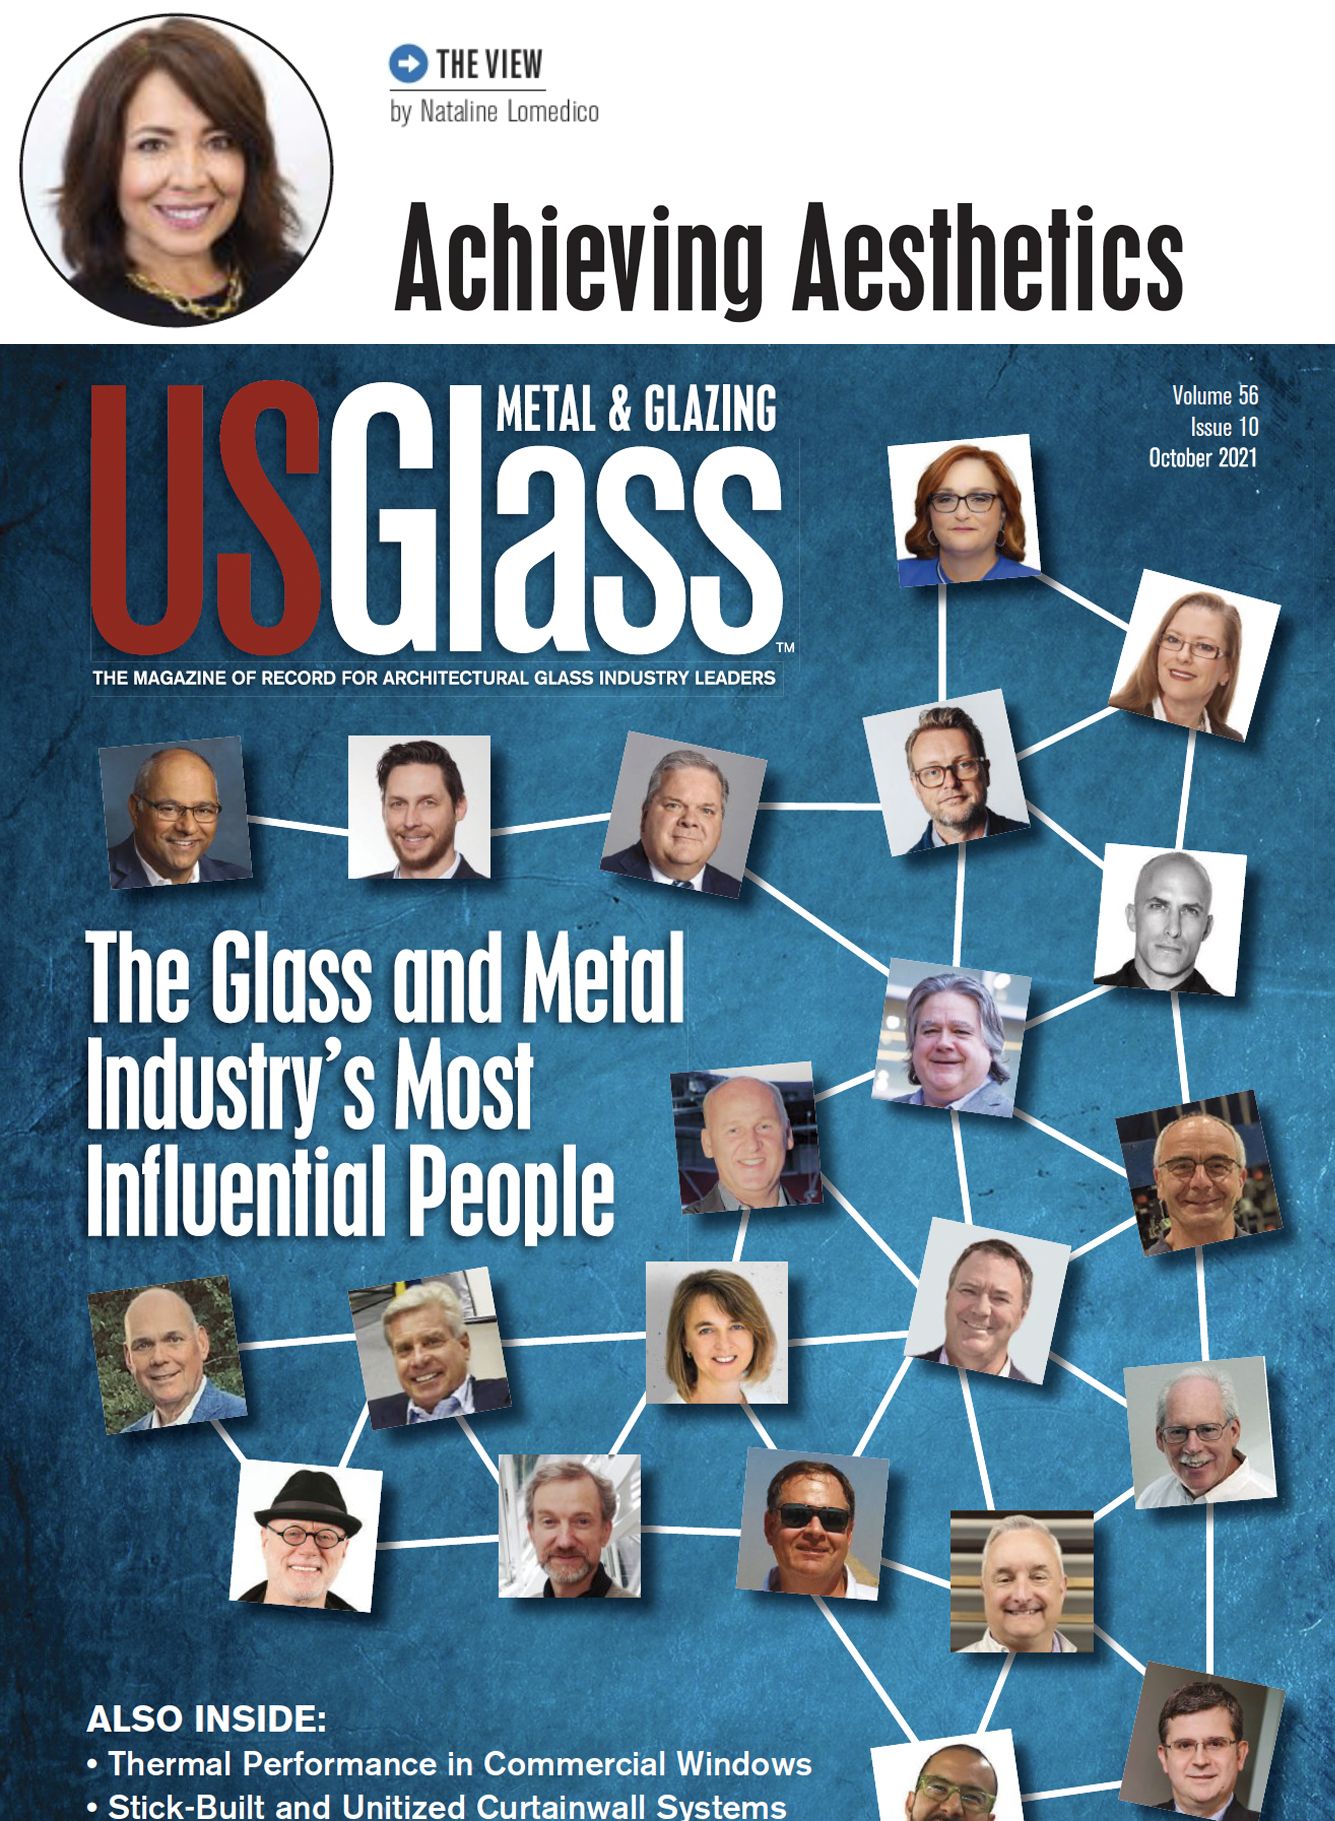 US Glass: Achieving Aesthetics – The View by Nataline Lomedico